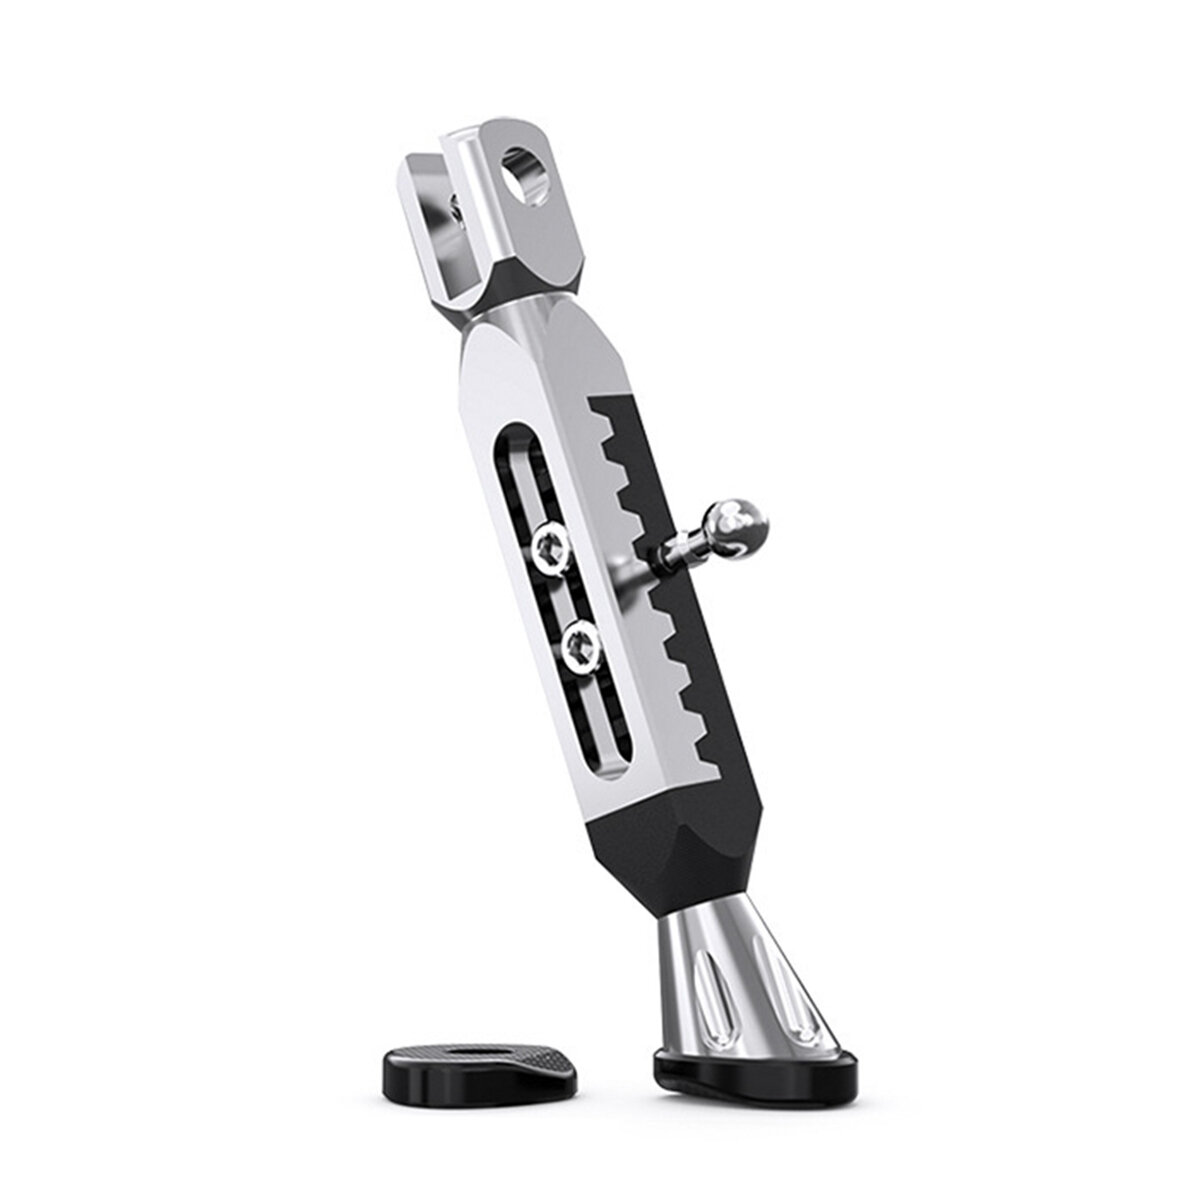 Height Adjustable CNC Aluminum Alloy Kickstand Foot Side Stand for Motorcycle